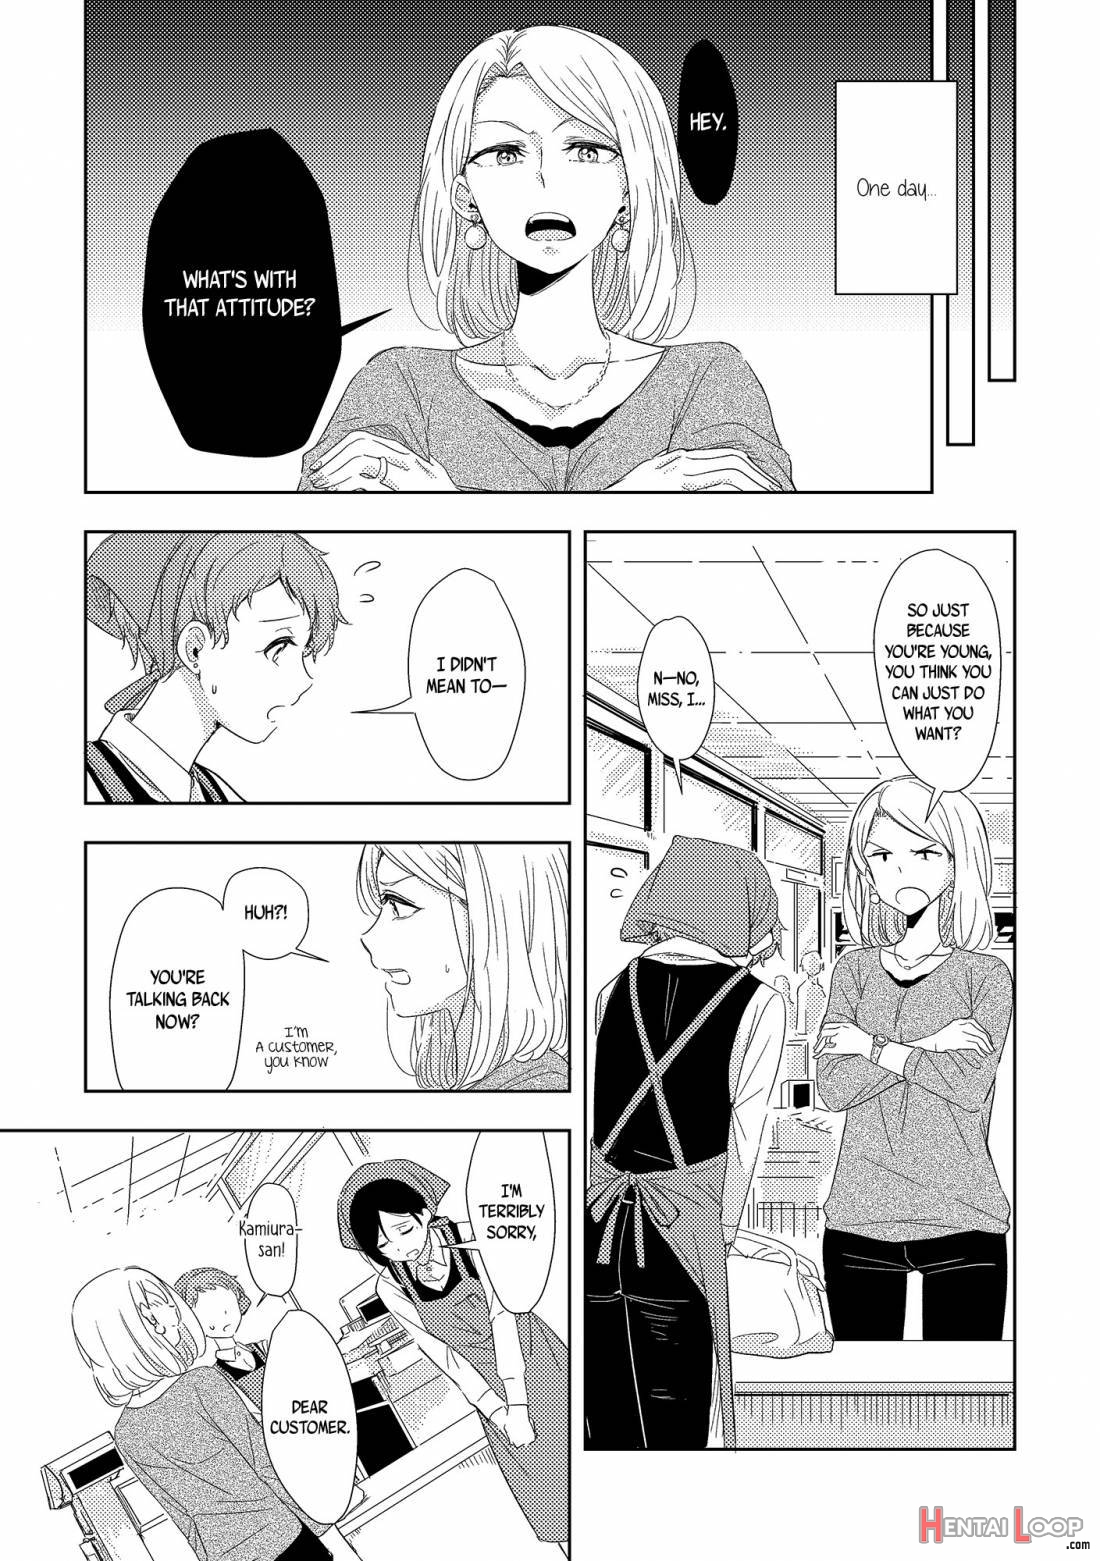 The Mysterious Kamiura-san page 6